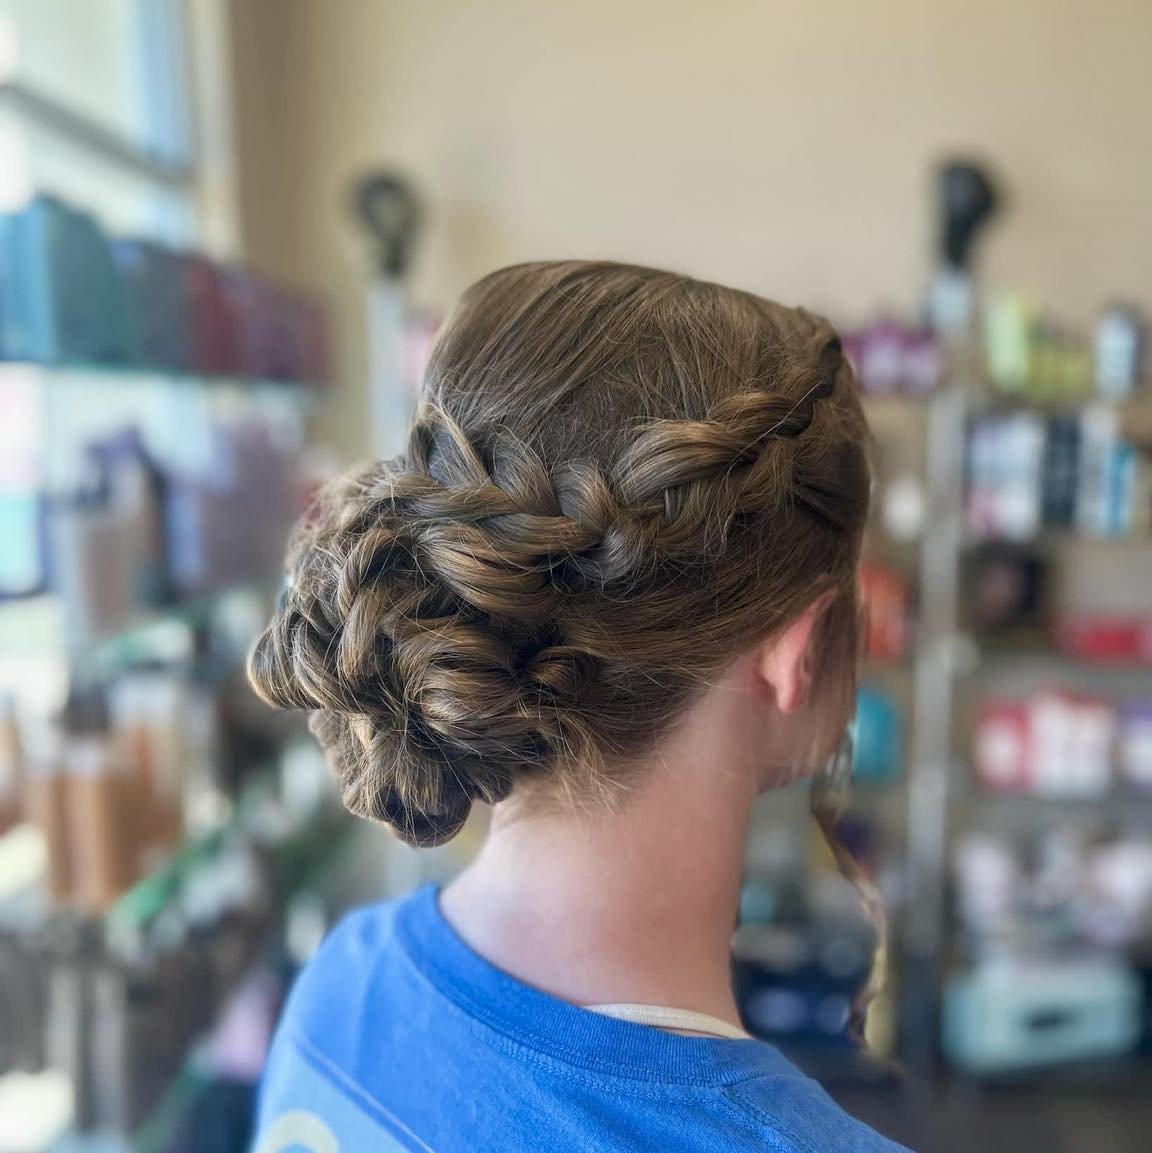 Prom season has arrived! 💃 Don't miss out&mdash;limited appointments are filling up fast. Secure your spot today by booking online! 

#easleyhairstylist #fusionsalonsc #easleysc #easleyprom #promhair #promhairstyles #prommakeup #fusionstylistemily